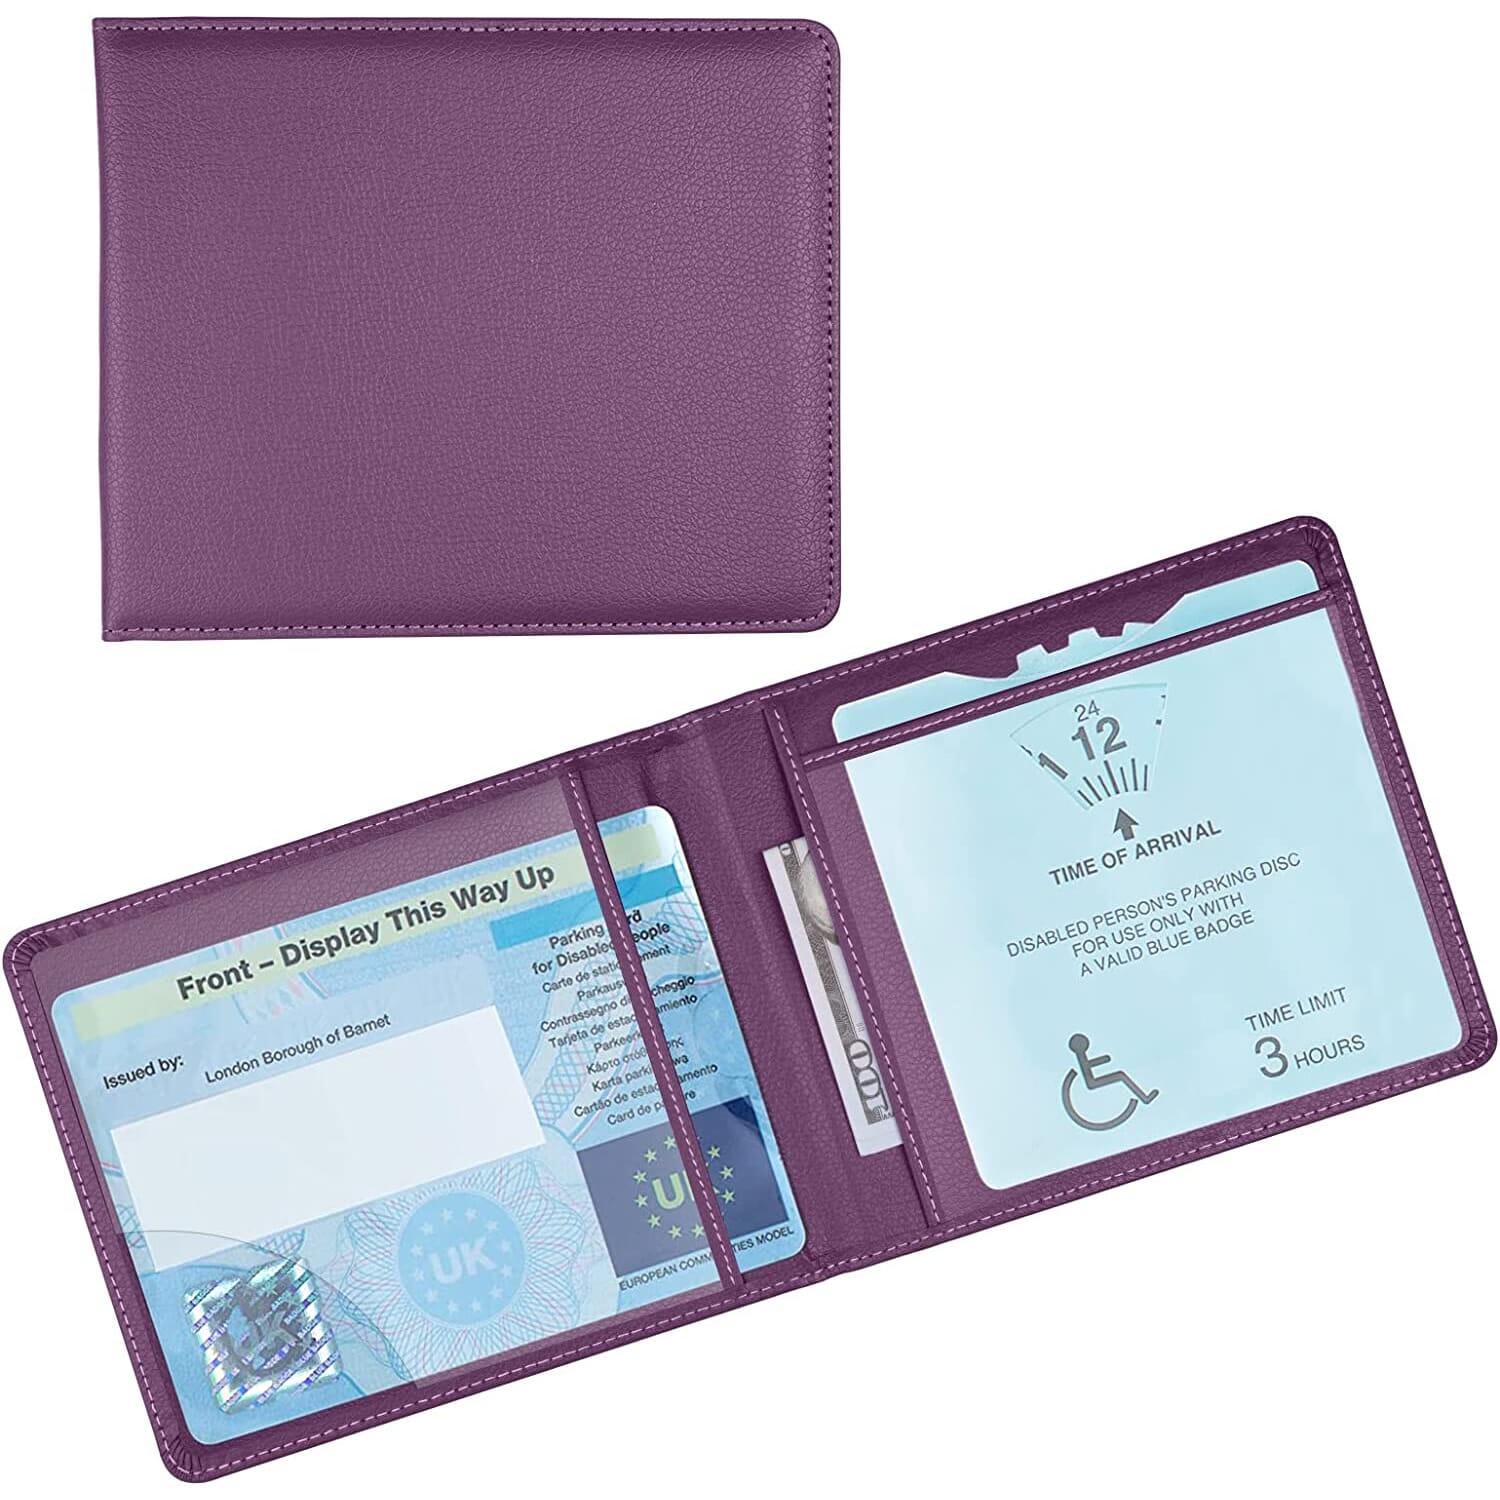 View Plastic Disabled Badge Wallet Purple information